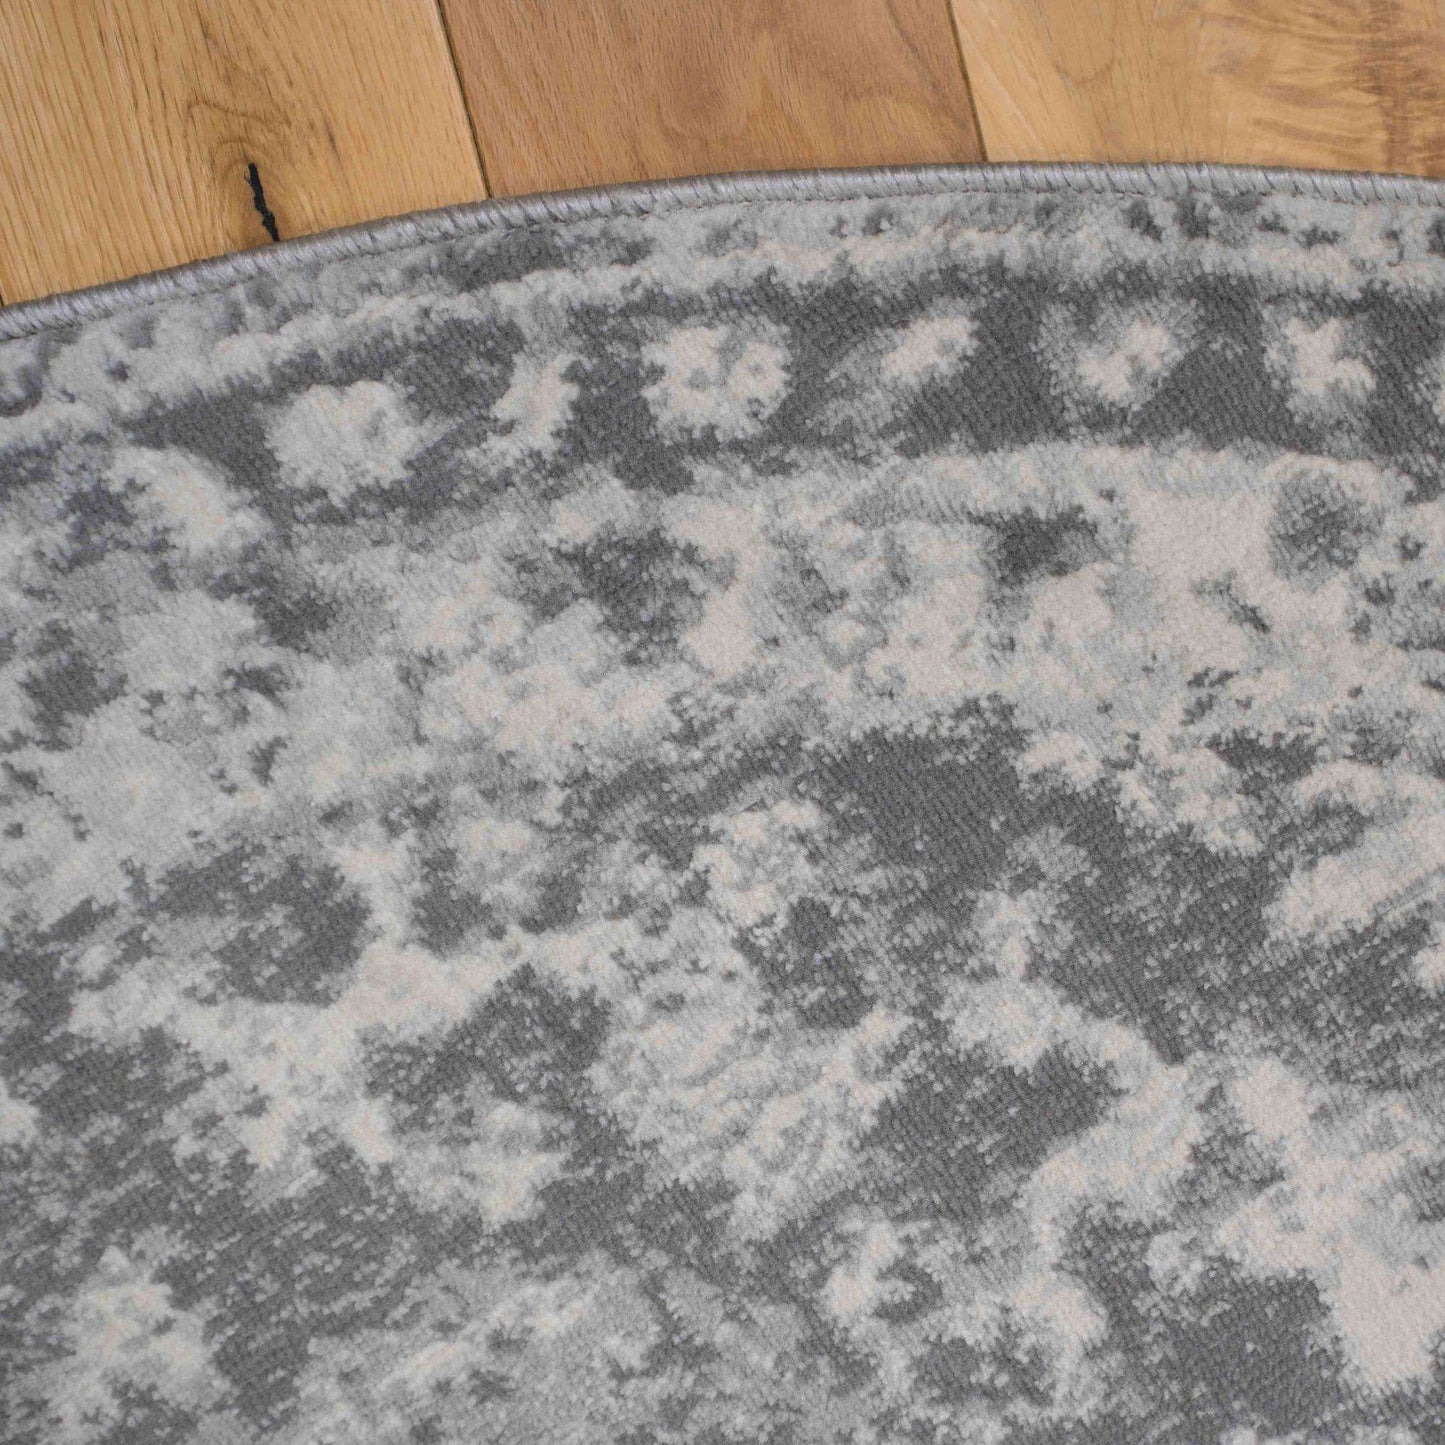 Round Circle Faded Distressed Grey Oriental Rug